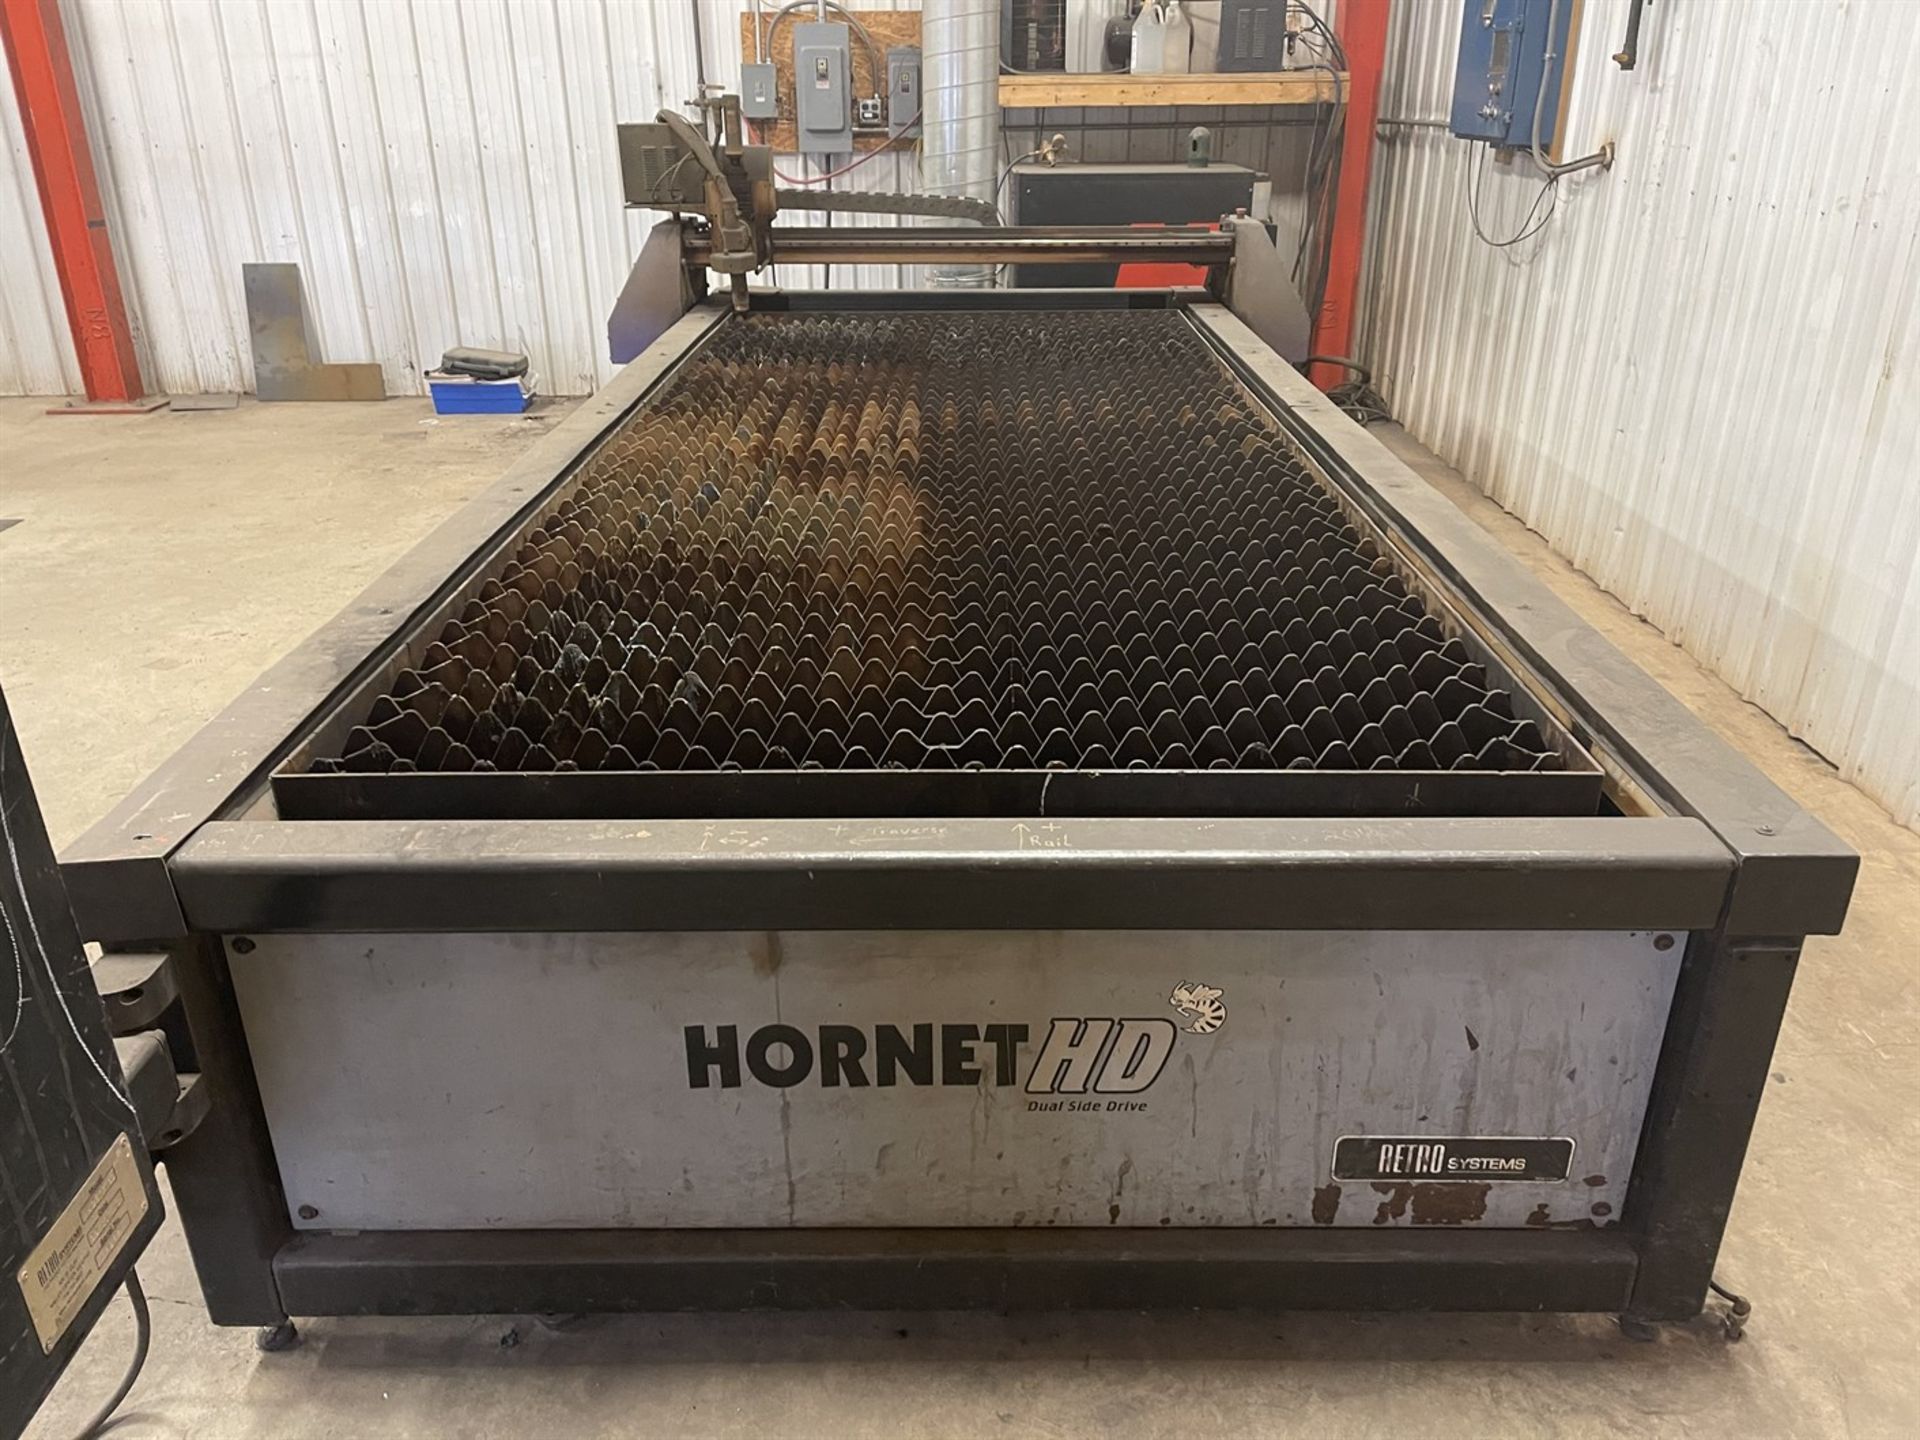 2010 Retro Systems Hornet HD HHDETR150 CNC Plasma Cutter, s/n 2266, 12' x 5' Downdraft Table, - Image 3 of 14